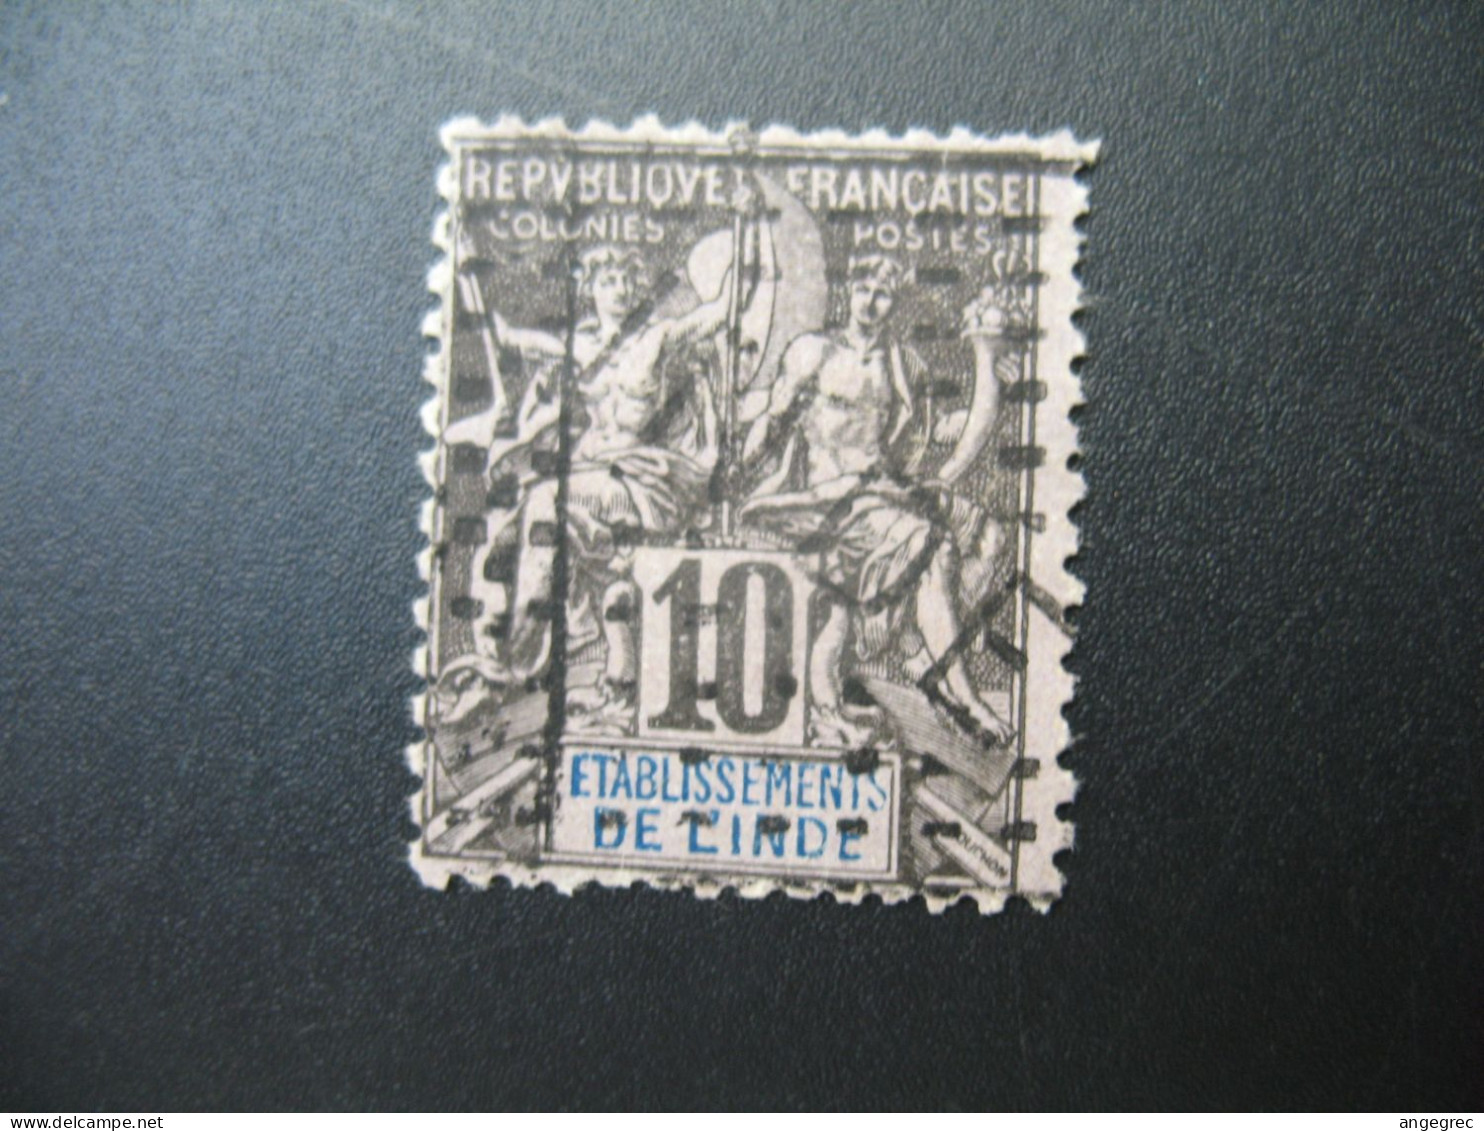 Inde Française Karikal Stamps French Colonies N° 5 Neuf * NSG Maury à Voir - Usati